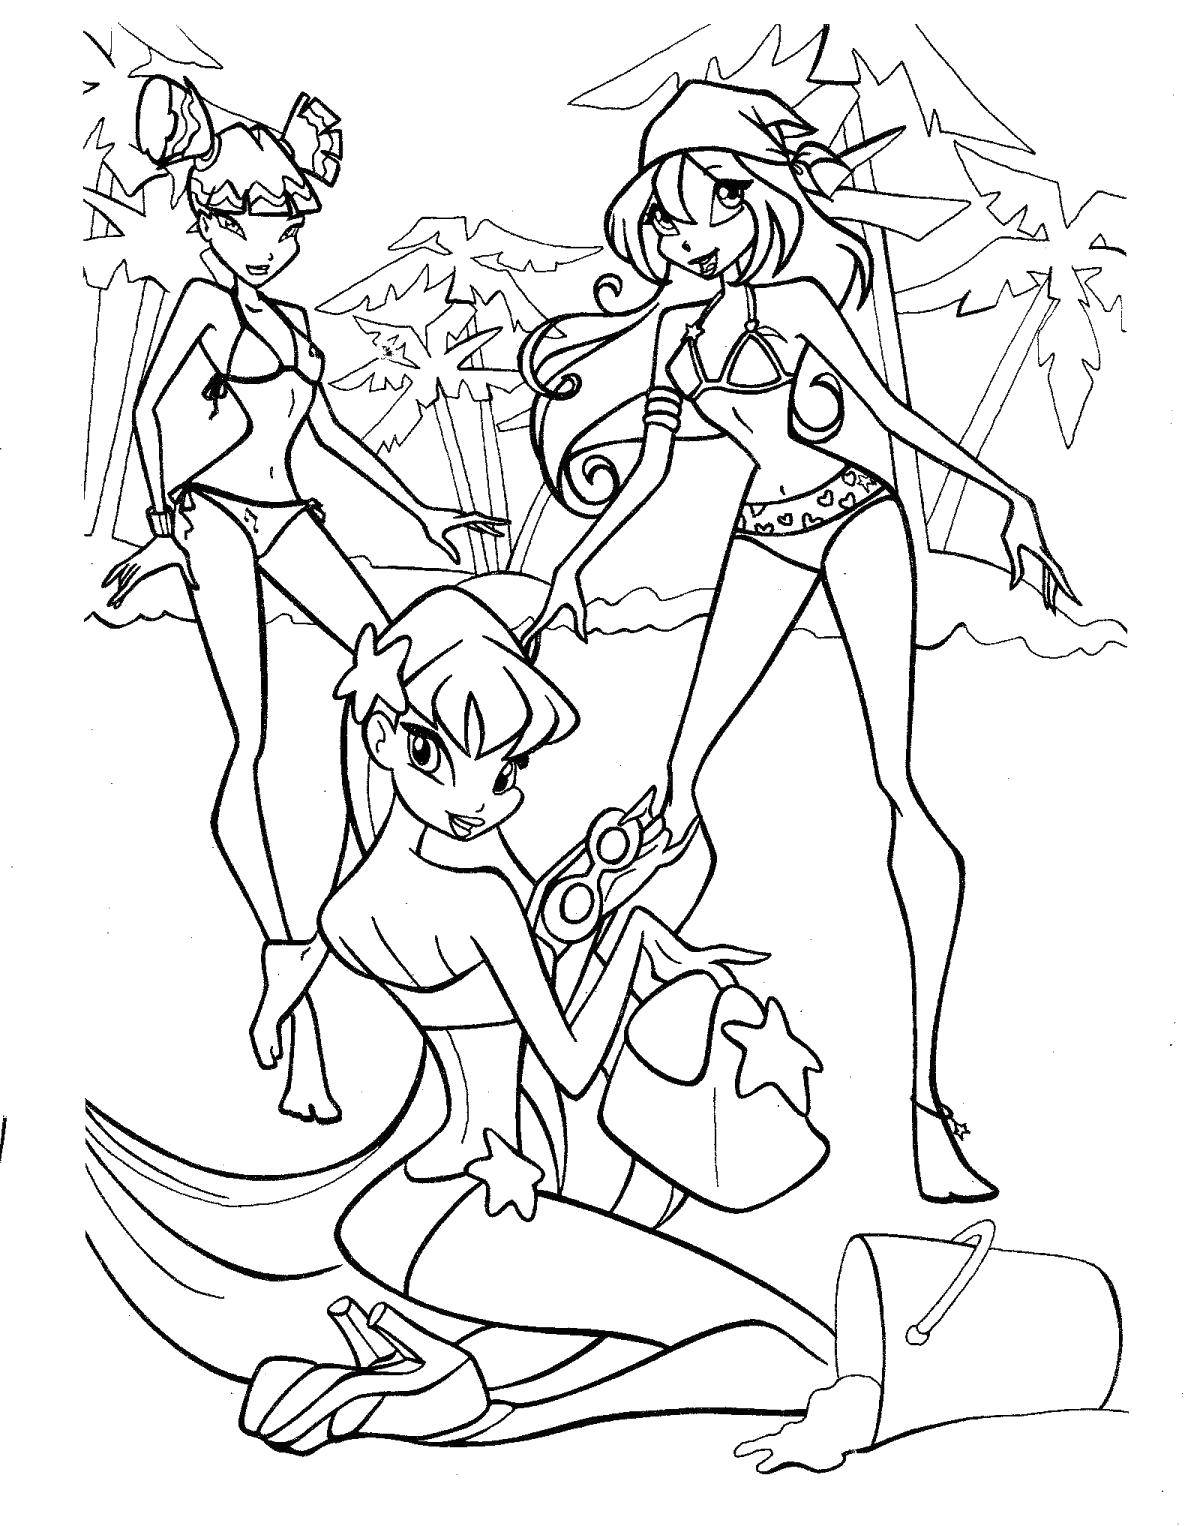 Coloring Bloom, Musa and Stella on the beach. Category Cartoon character. Tags:  Character cartoon, Winx.